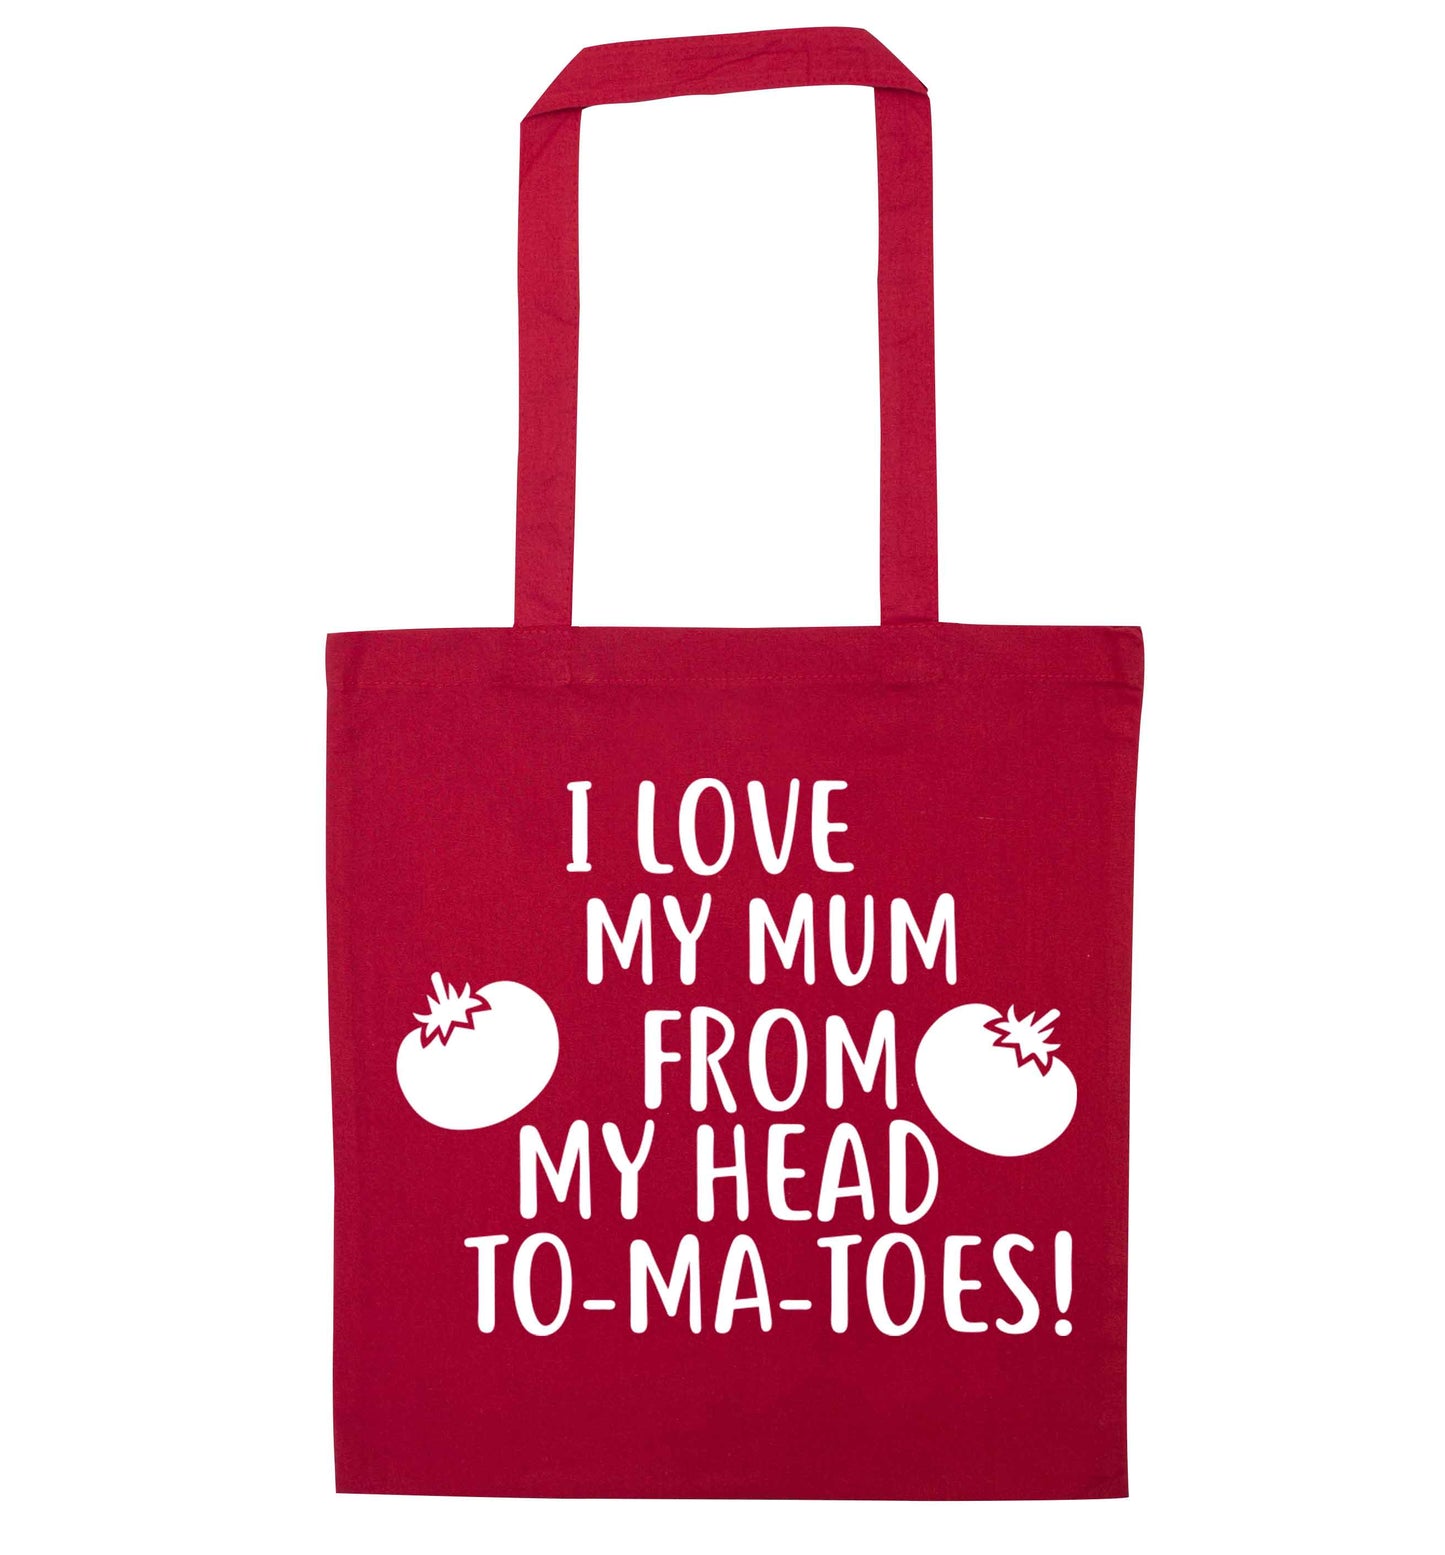 I love my mum from my head to-my-toes! red tote bag